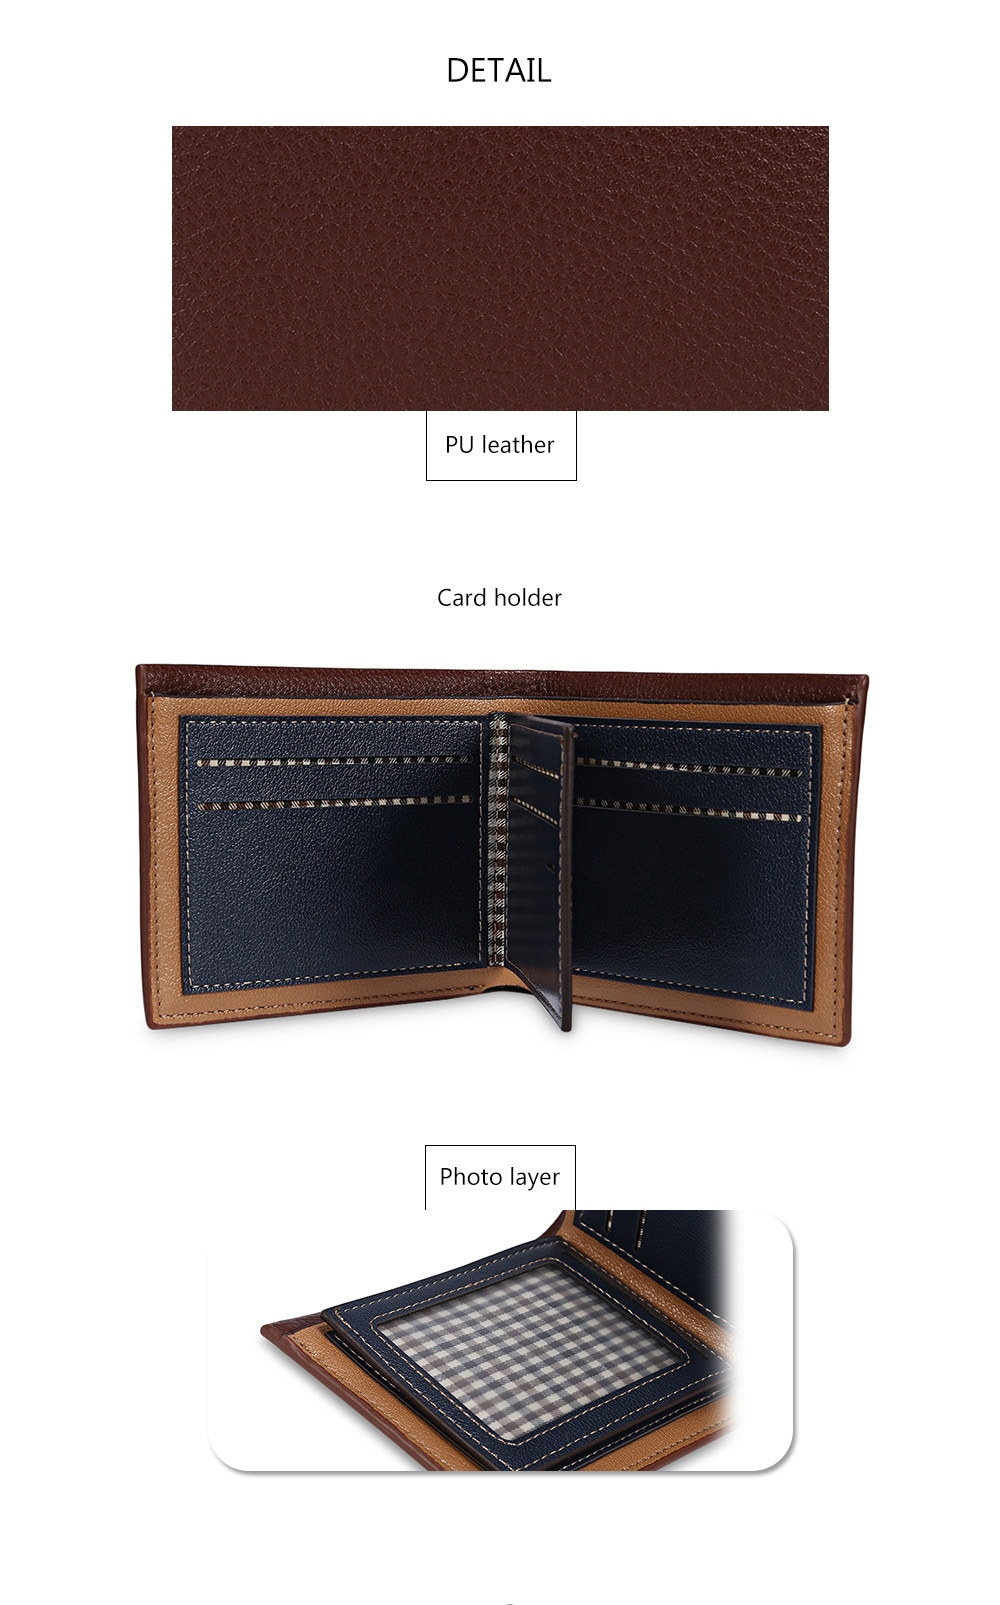 Baellerry Stylish Soft PU Leather Card Holder Short Wallet for Men- Light Coffee